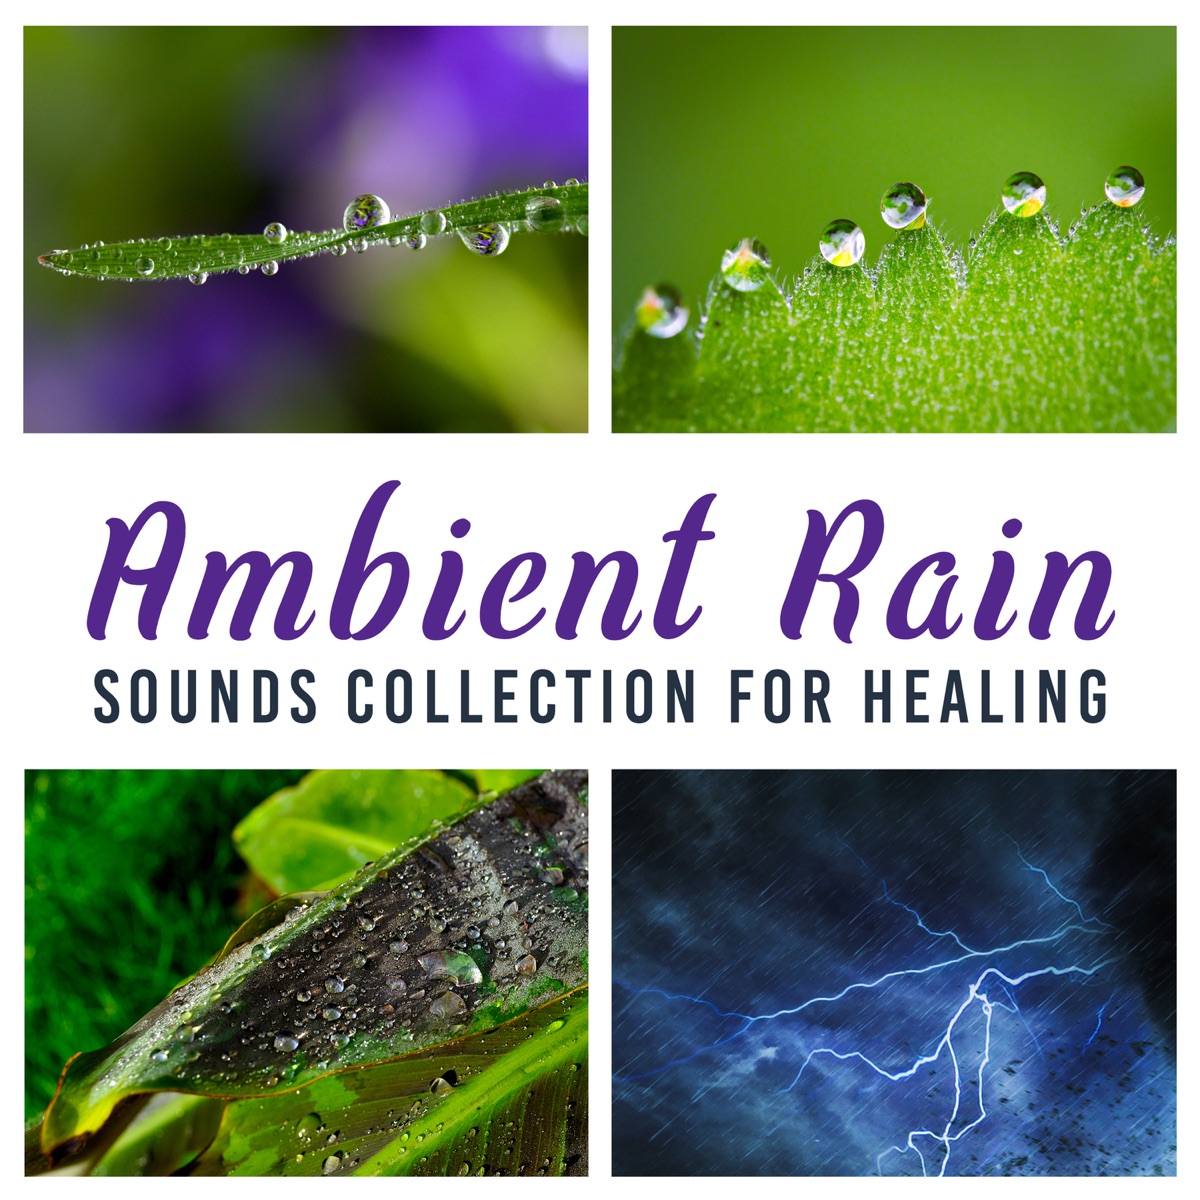 Rain Sounds for Sleeping: Best Selection of Relaxing Background Music,  Gentle Night Rain for Insomnia, Meditation, Peace, Spa, Yoga by Healing Rain  Sound Academy on Apple Music